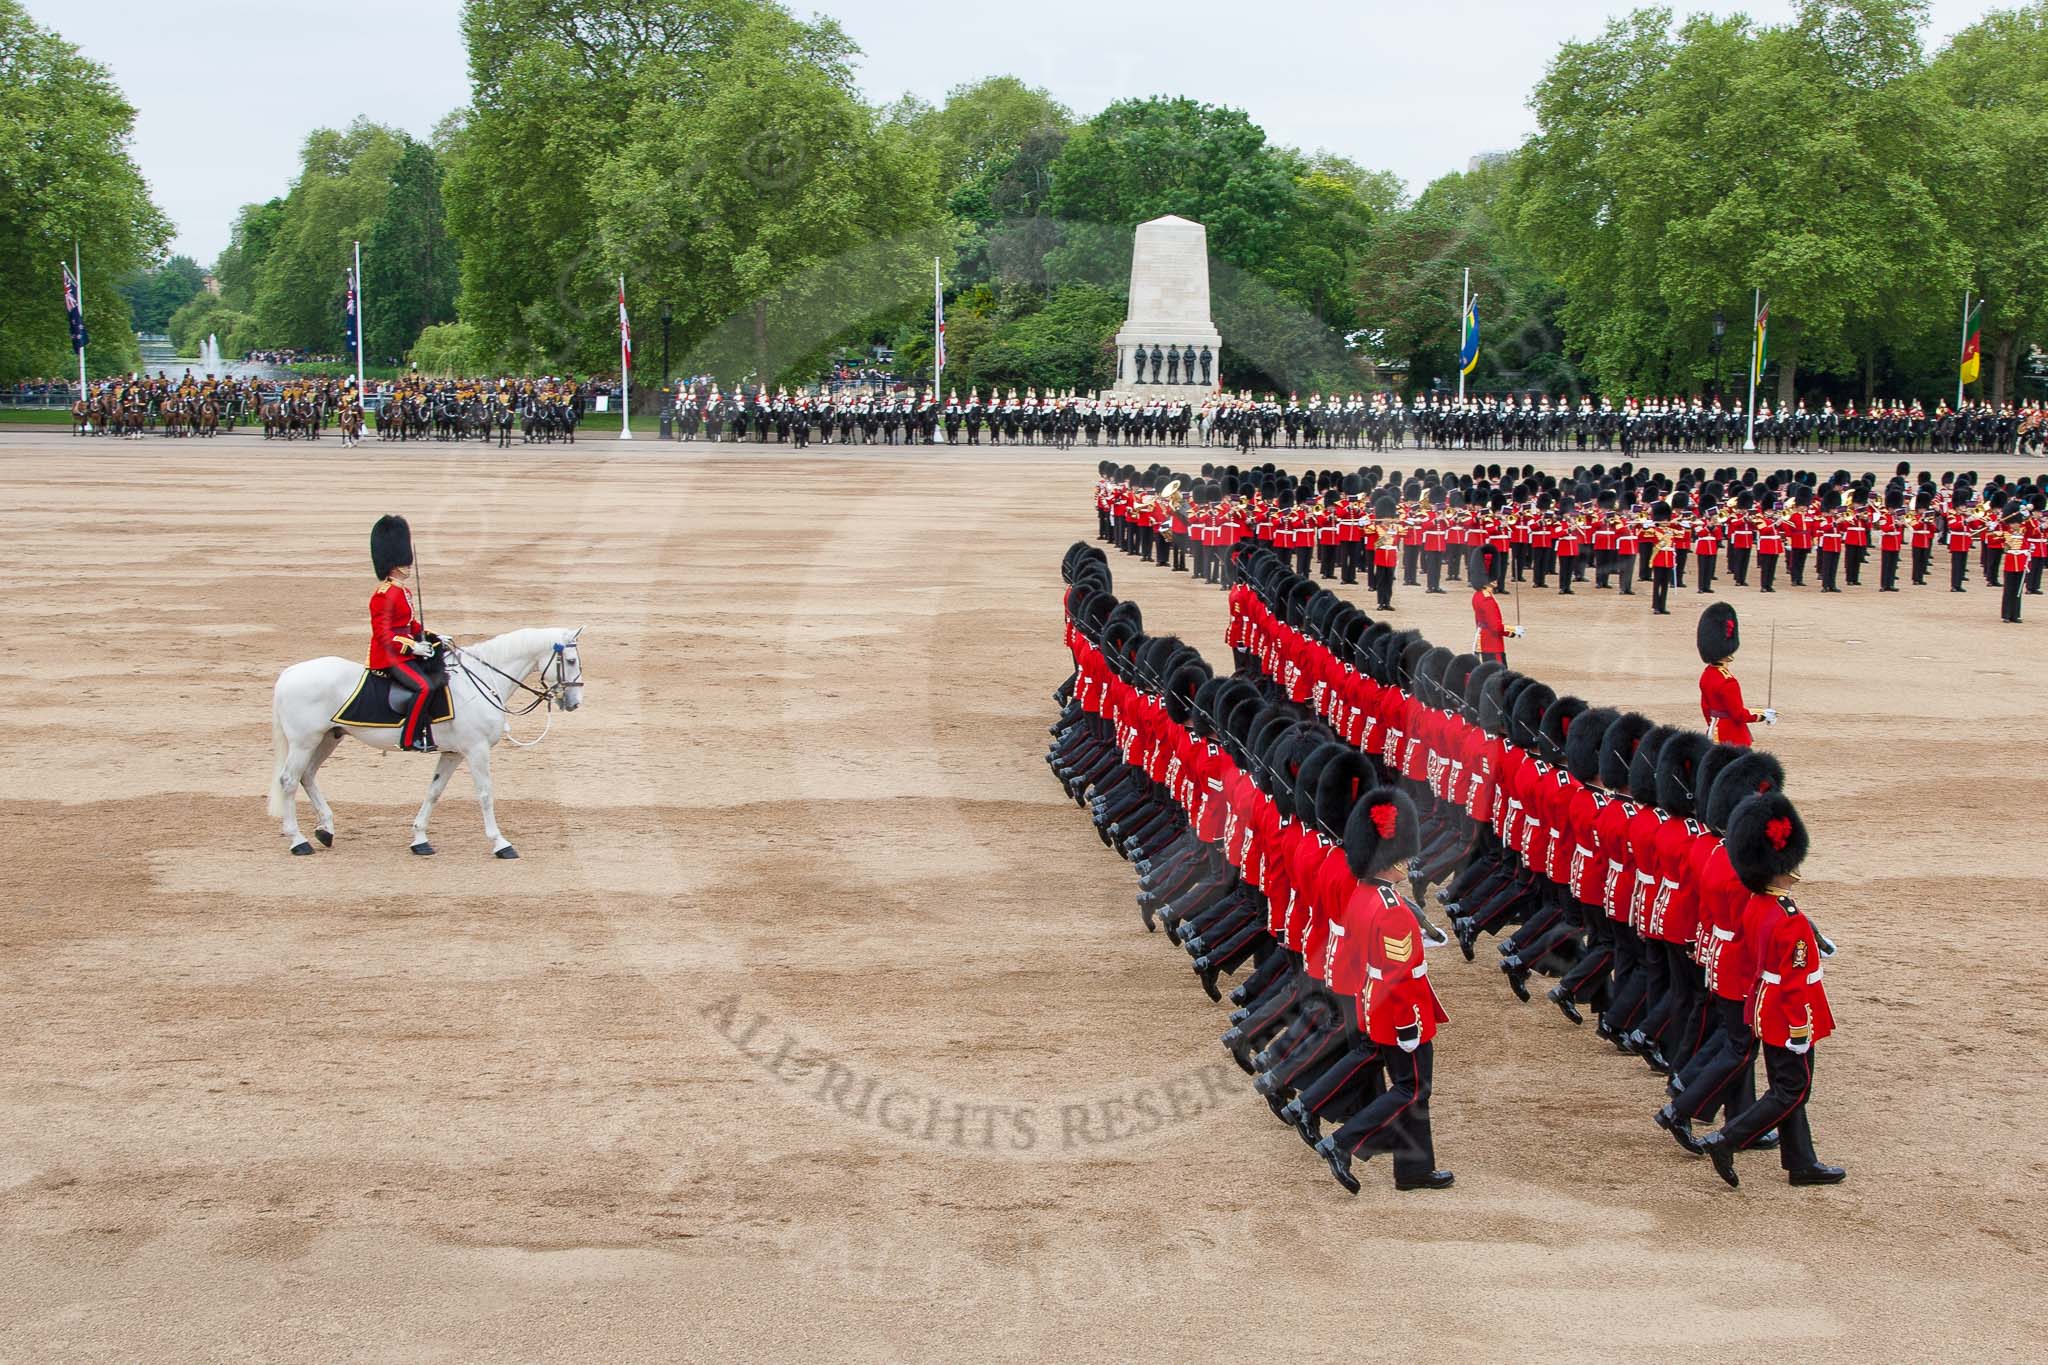 Major General's Review 2013: The March Past in Slow Time-No.6 Guard, No.7 Company, Coldstream Guards and The Adjutant of the Parade, Captain C J P Davies, Welsh Guards..
Horse Guards Parade, Westminster,
London SW1,

United Kingdom,
on 01 June 2013 at 11:36, image #512